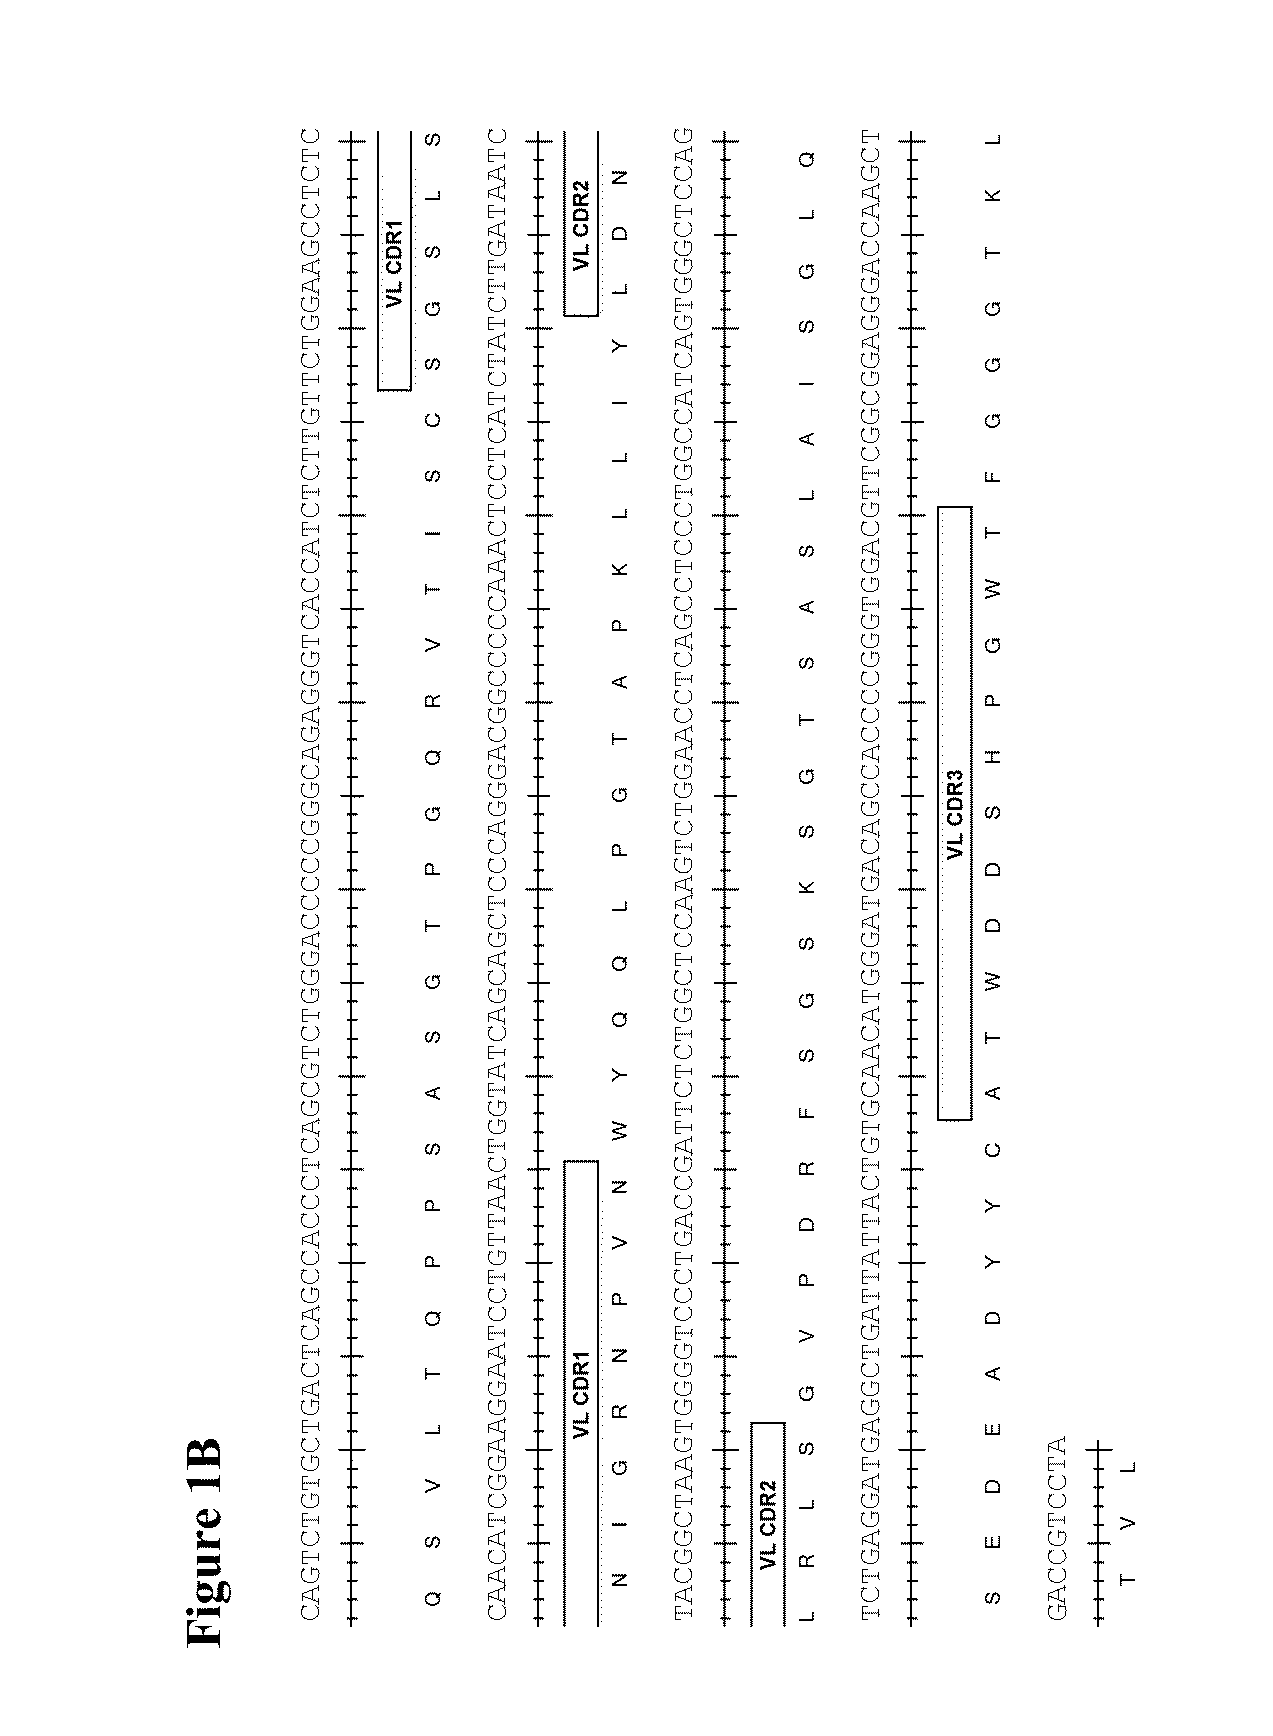 Therapeutic combinations comprising Anti-cd73 antibodies and uses thereof